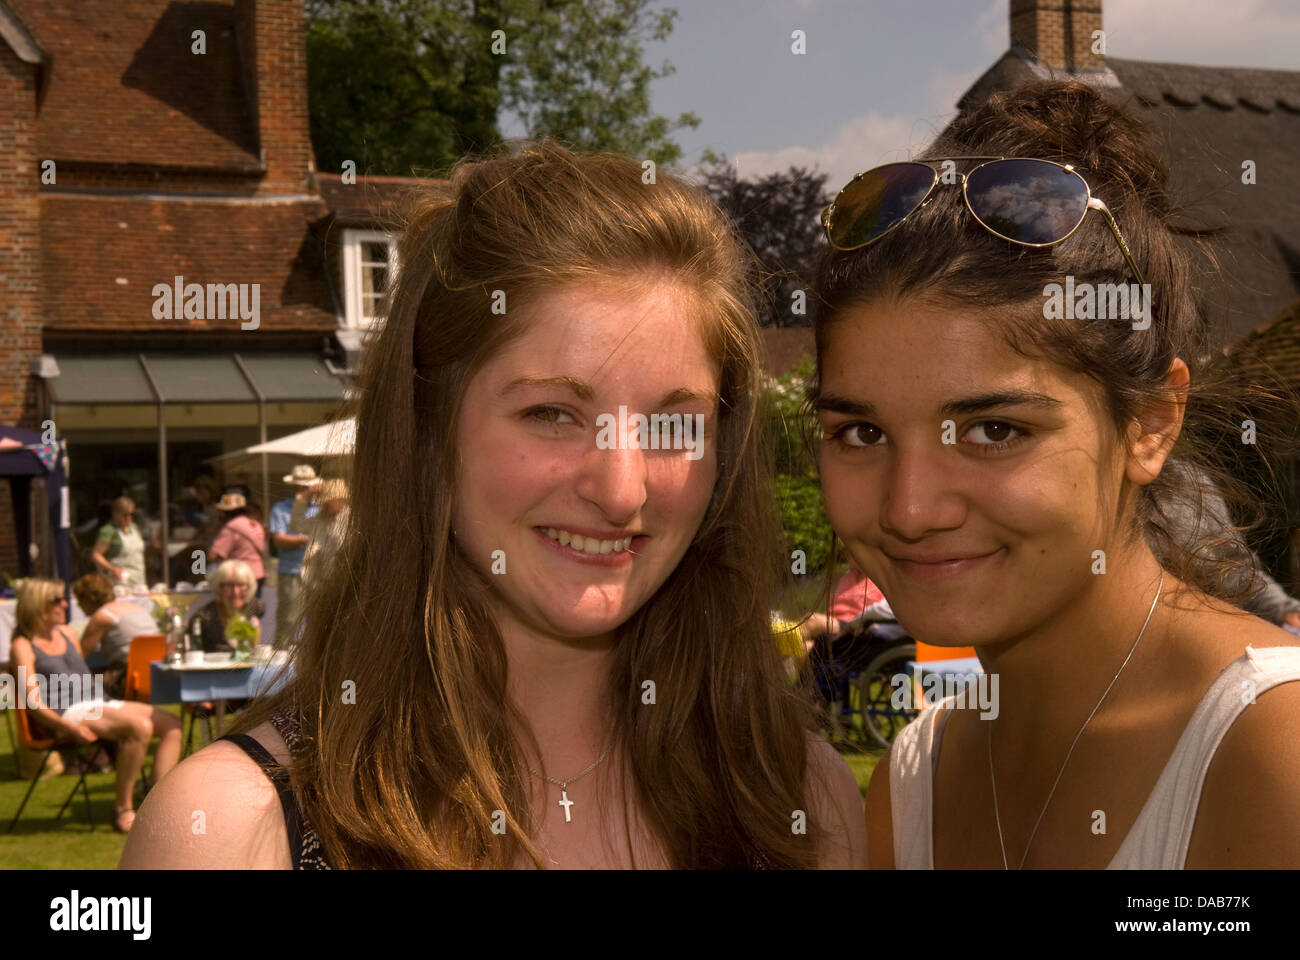 Two 15 year old friends at a village summer fete, East Meon, Hampshire, UK. Stock Photo